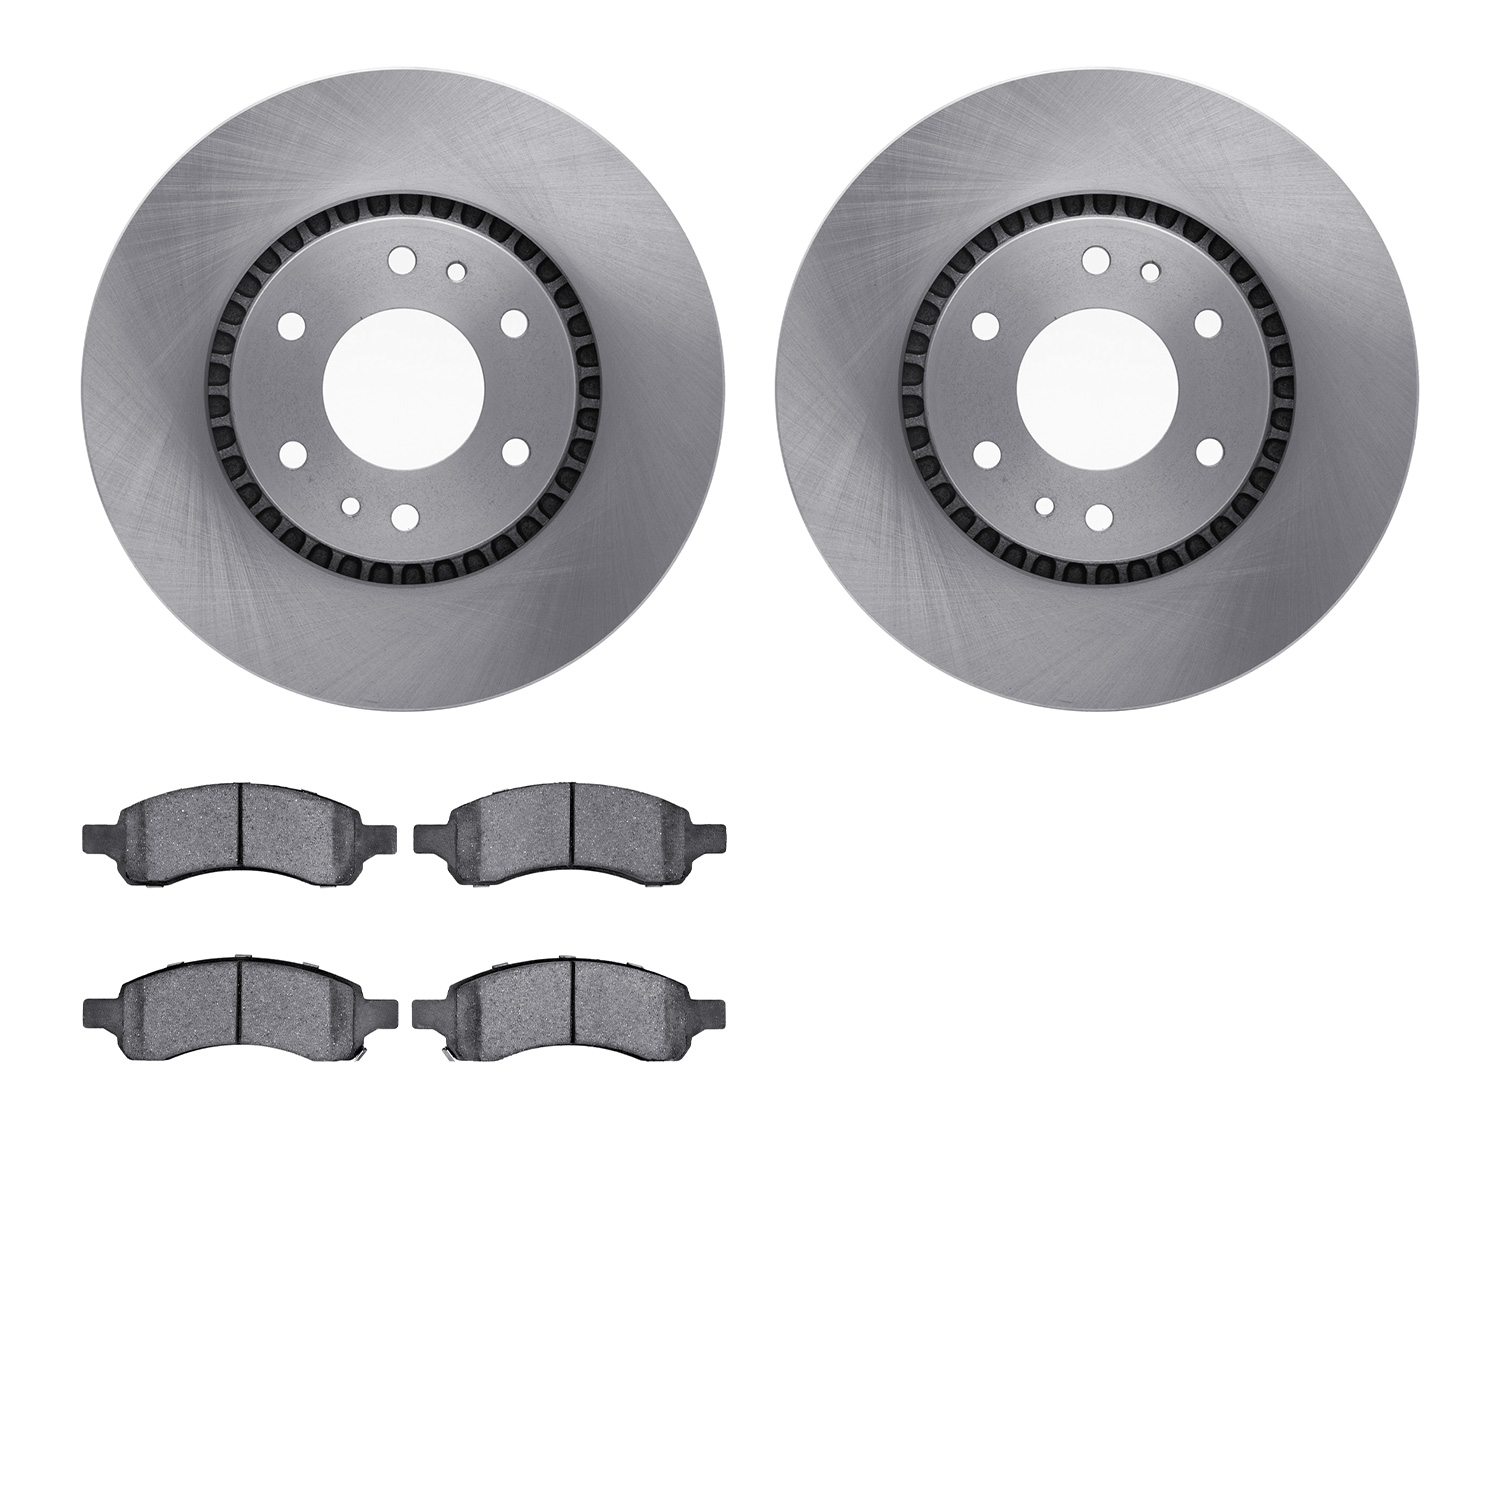 6402-48088 Brake Rotors with Ultimate-Duty Brake Pads, 2006-2009 GM, Position: Front